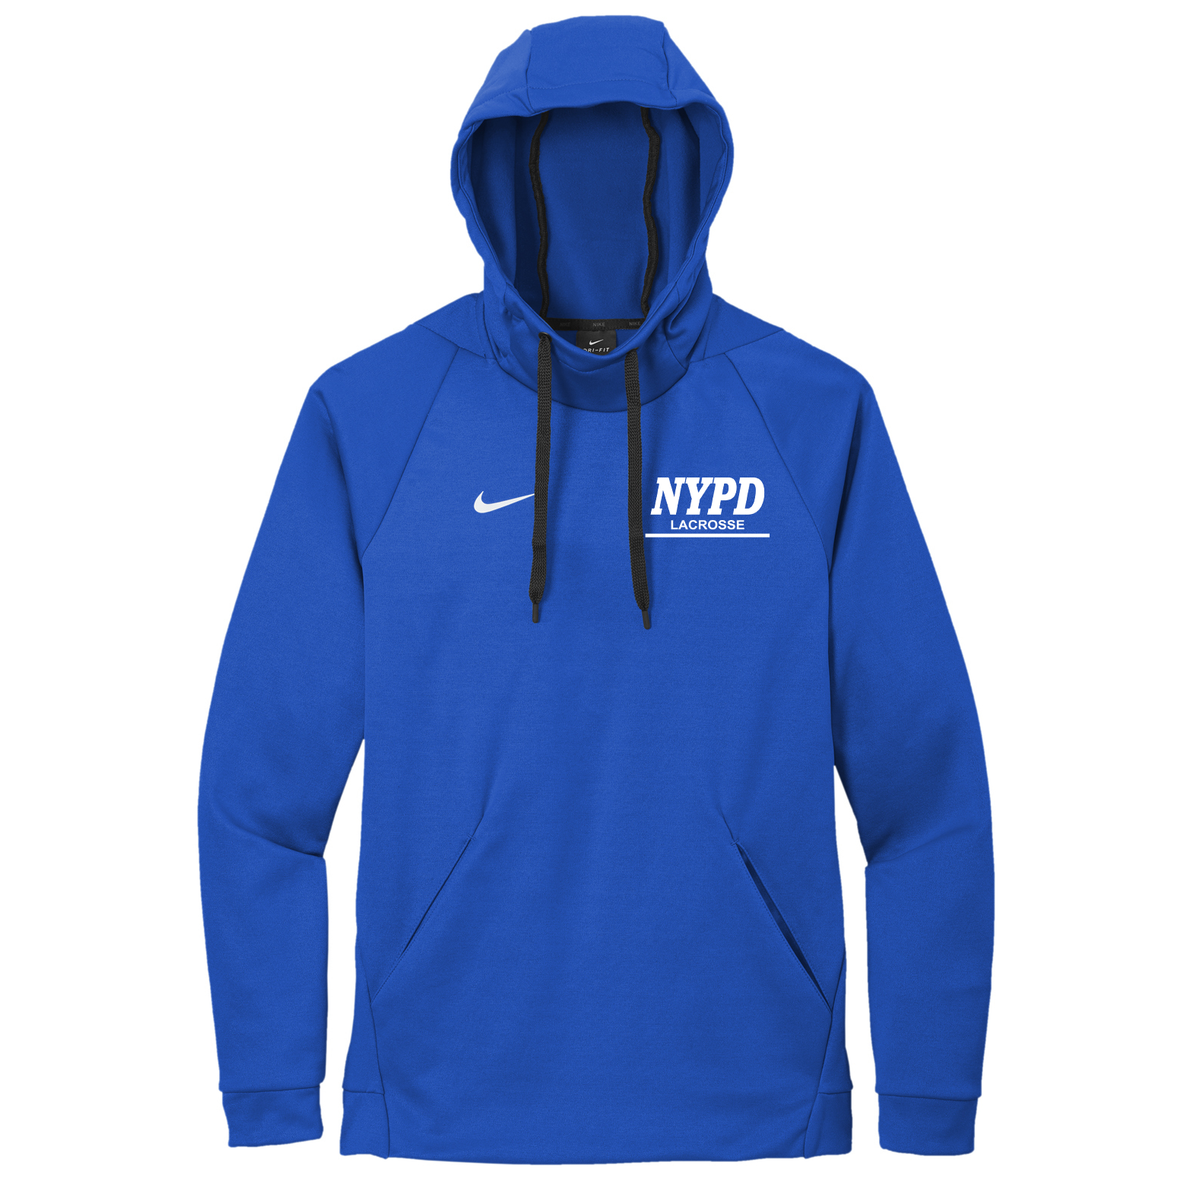 NYPD Lacrosse Nike Therma-FIT Embroidered Hoodie